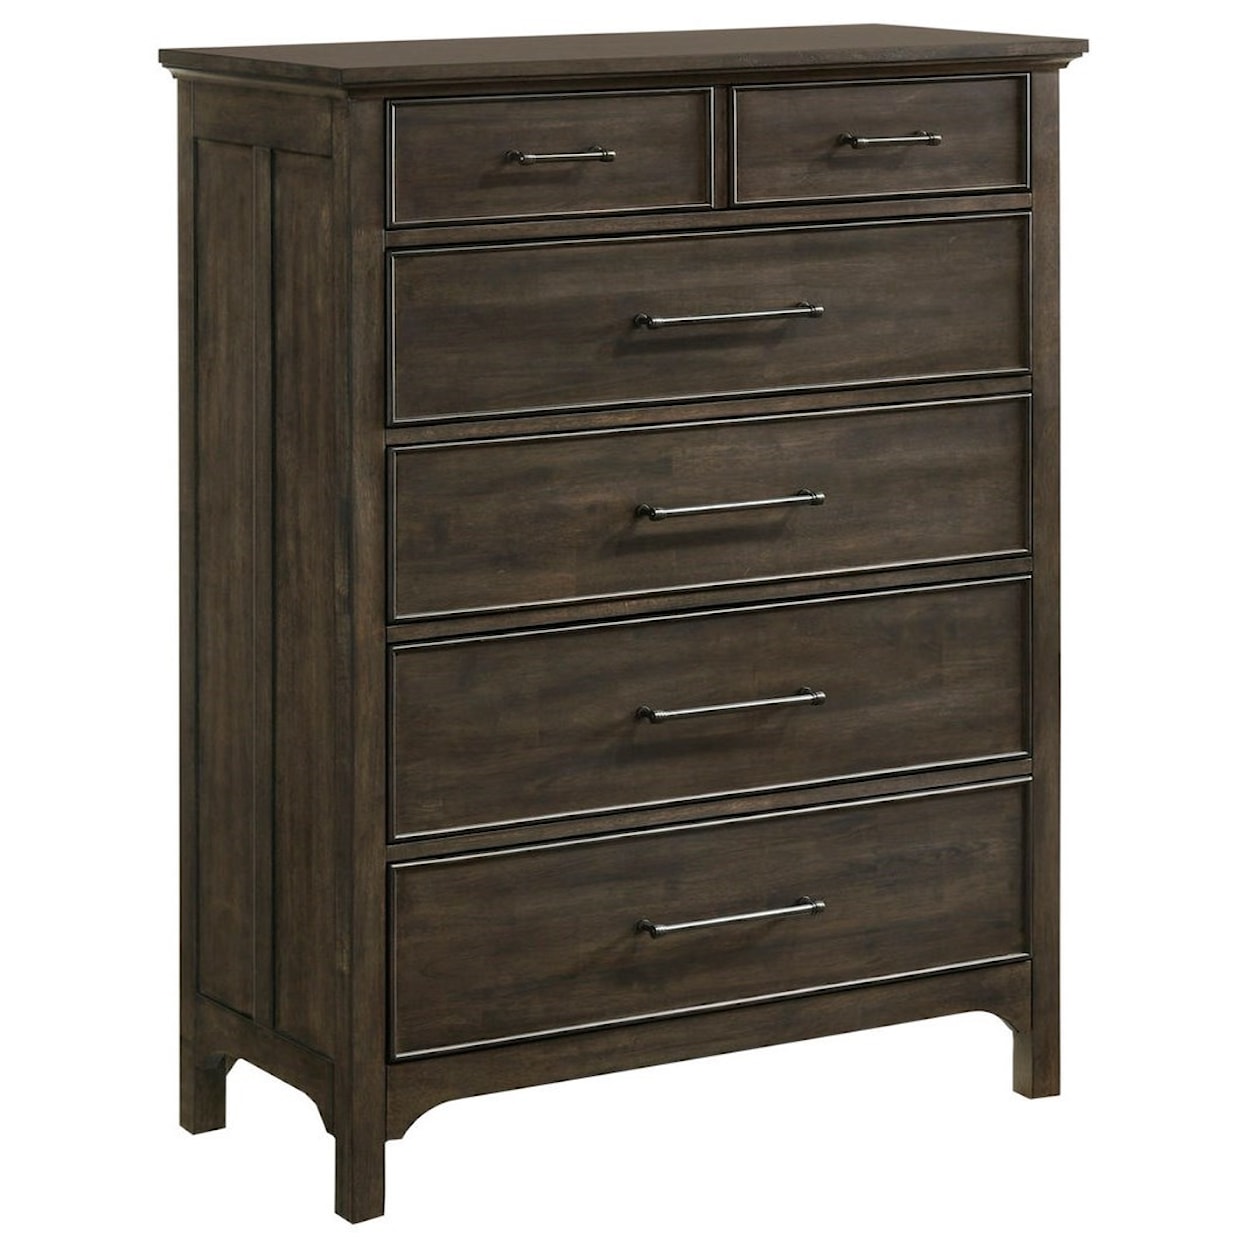 Intercon Hawthorne Chest of Drawers